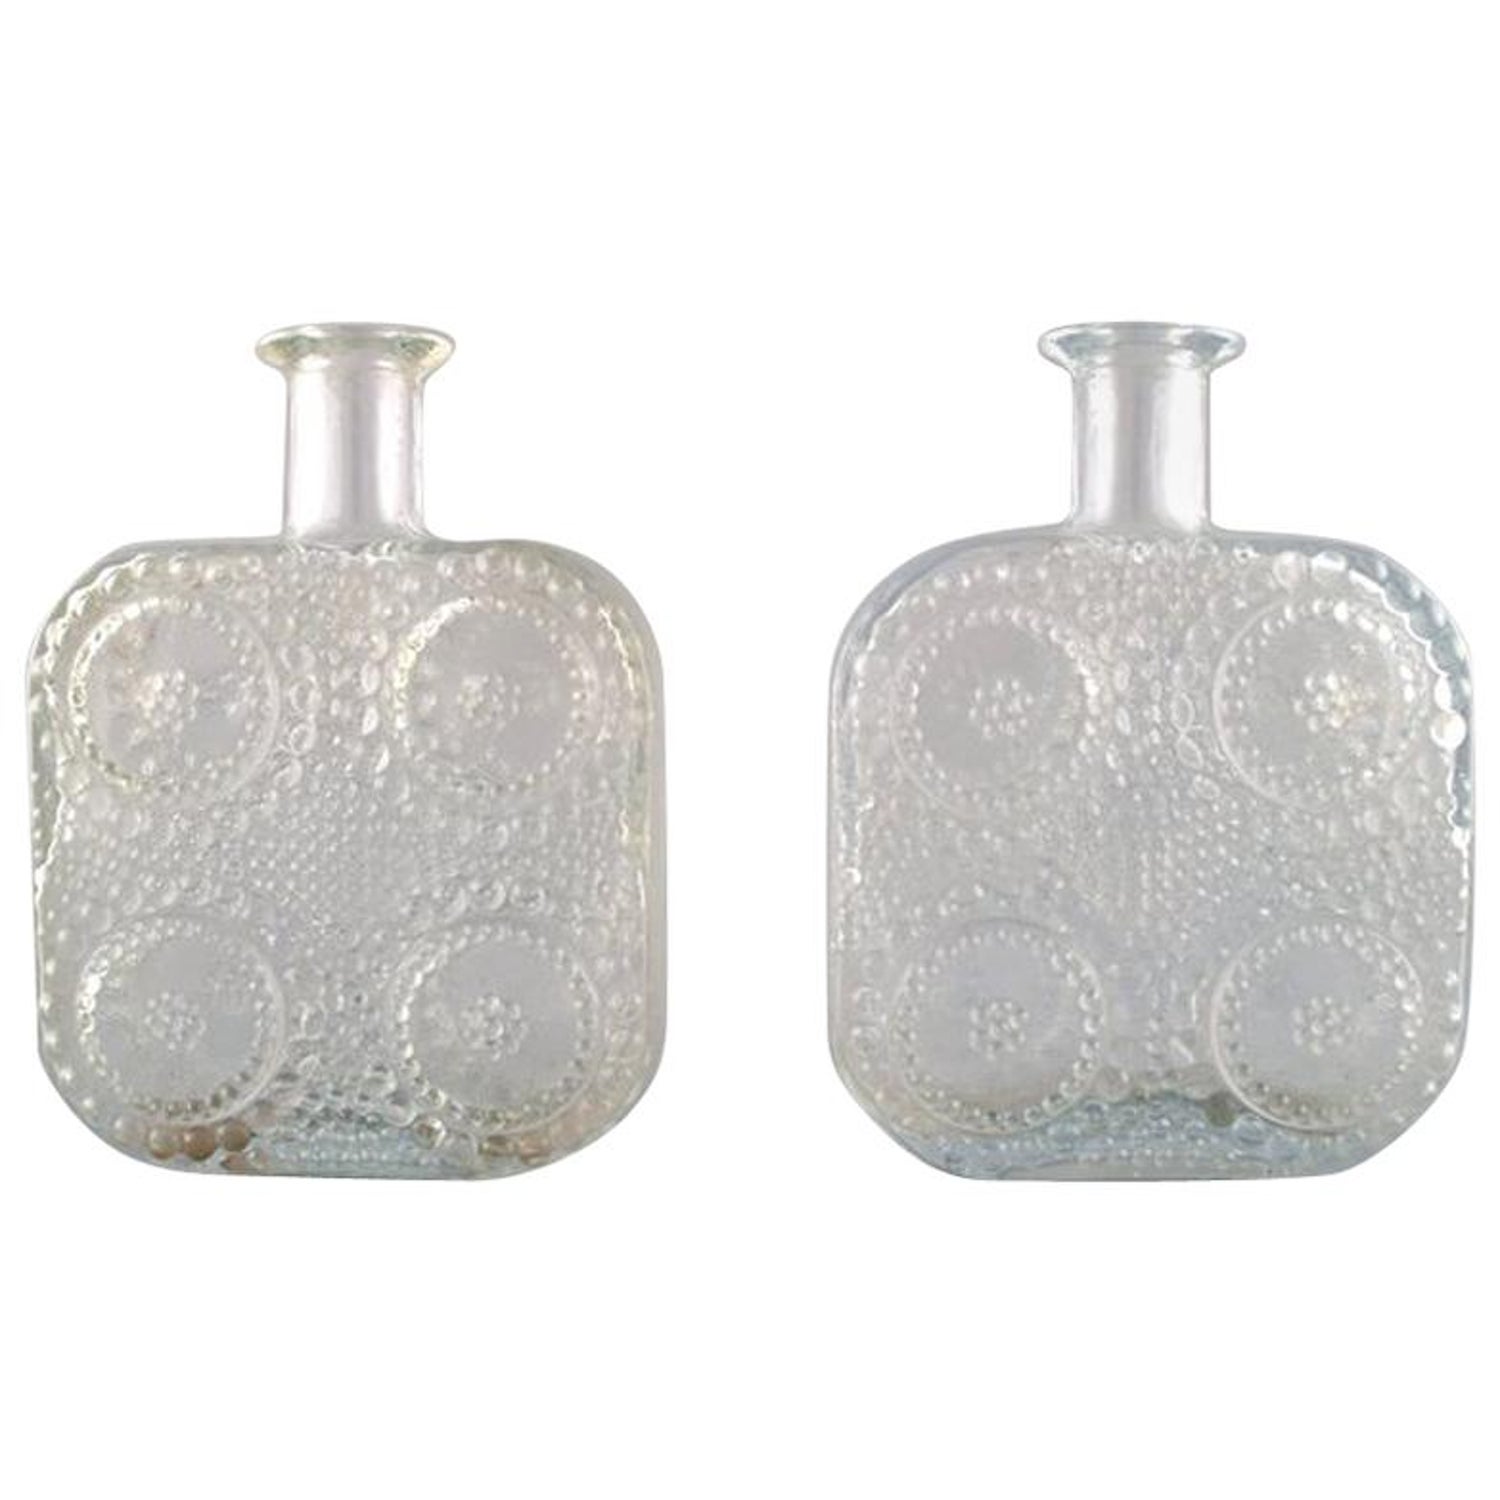 Nanny Still for Riihimäen Lasi, a Pair of Finnish Grapponia Glass Art Vases  For Sale at 1stDibs